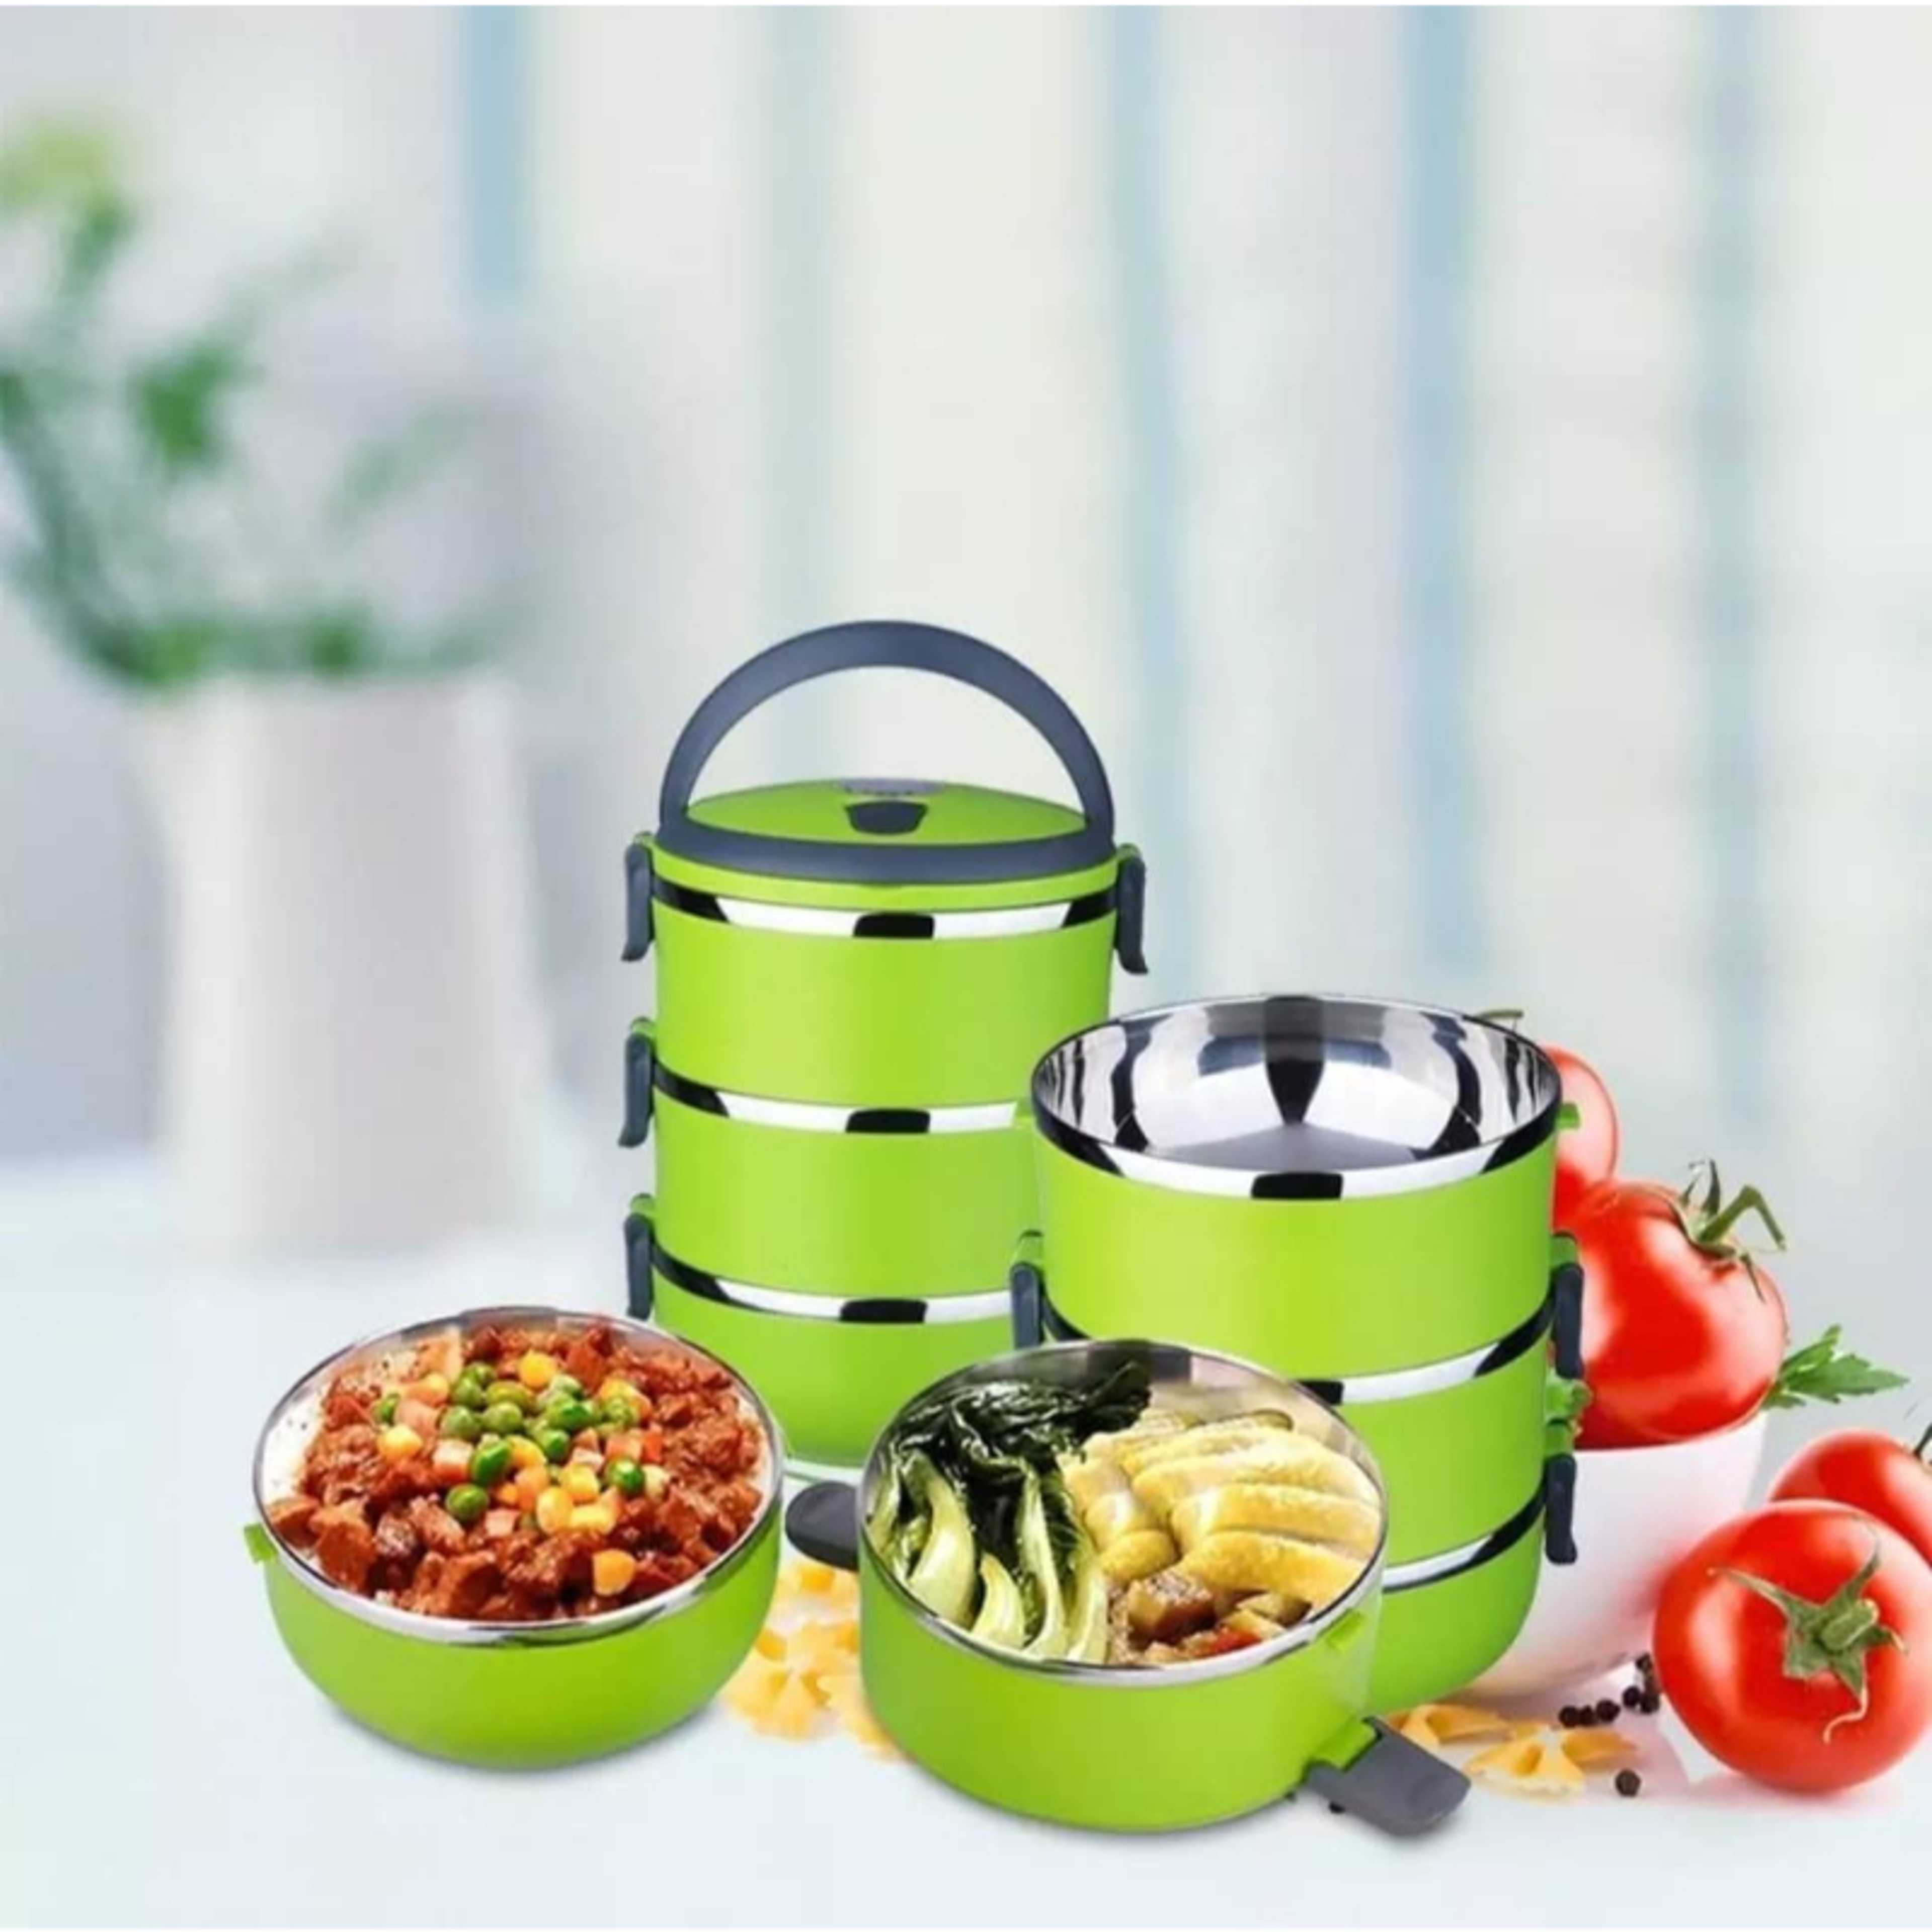 Tiffin Lunch Box 3 Layer Stainless Steel Bowls Keeps Food Hot